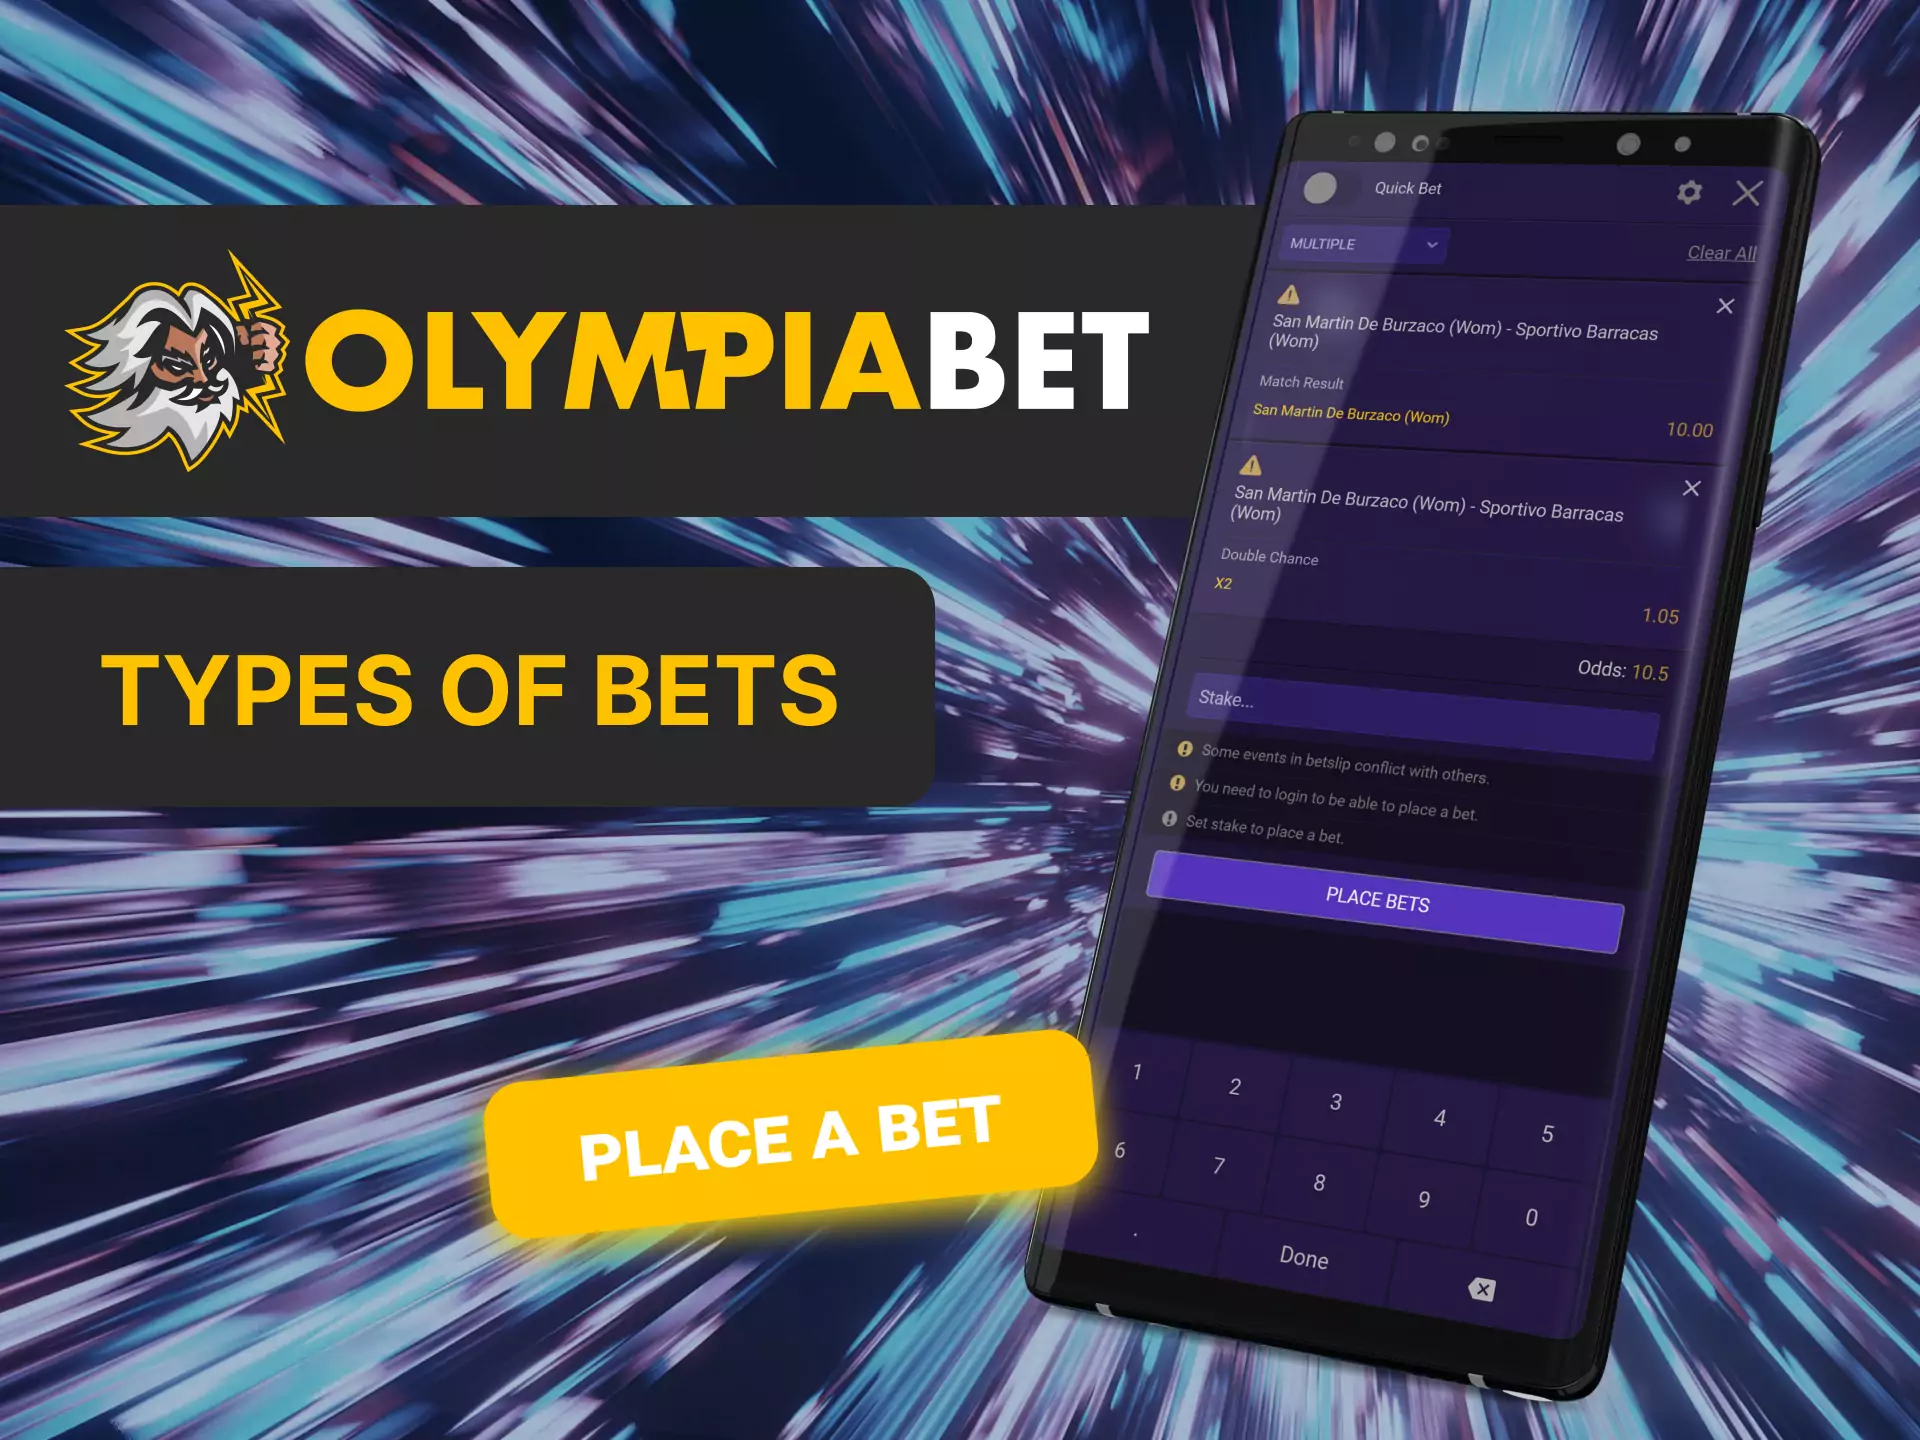 Various types of bets are available to players in OlympiaBet